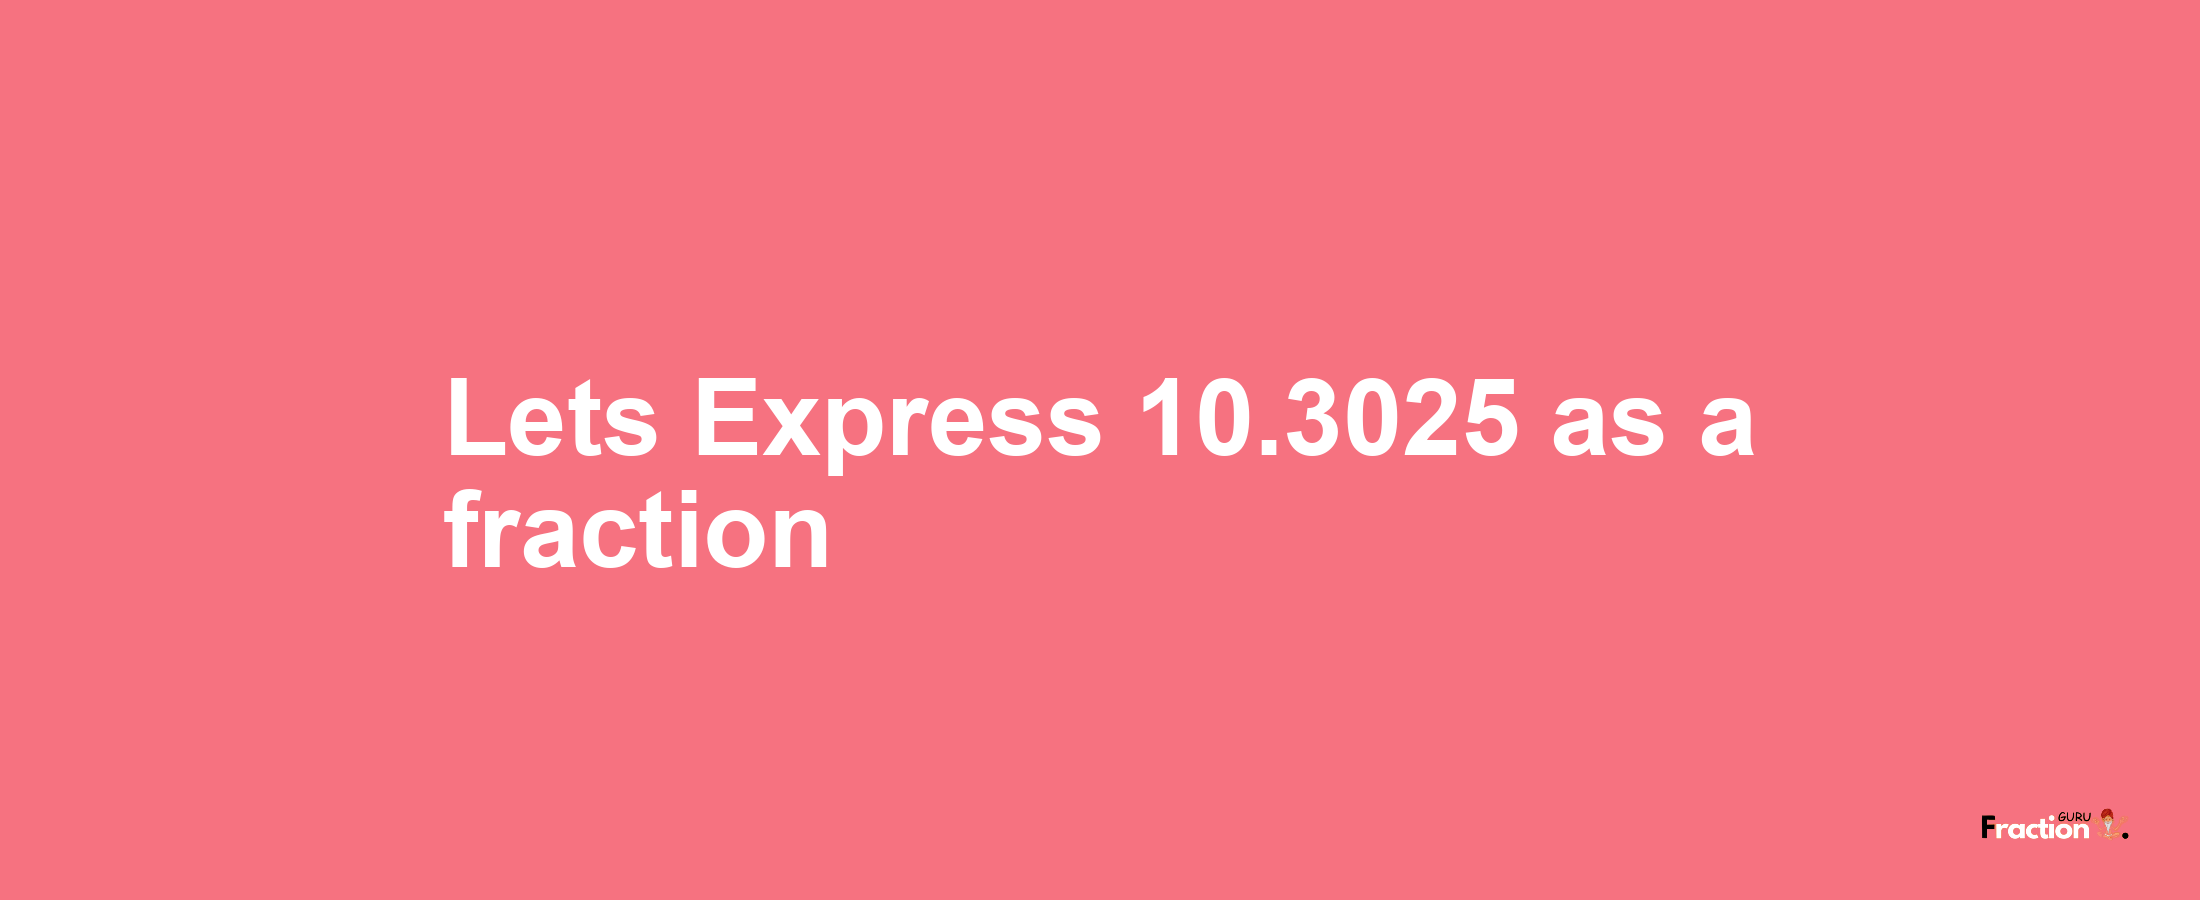 Lets Express 10.3025 as afraction